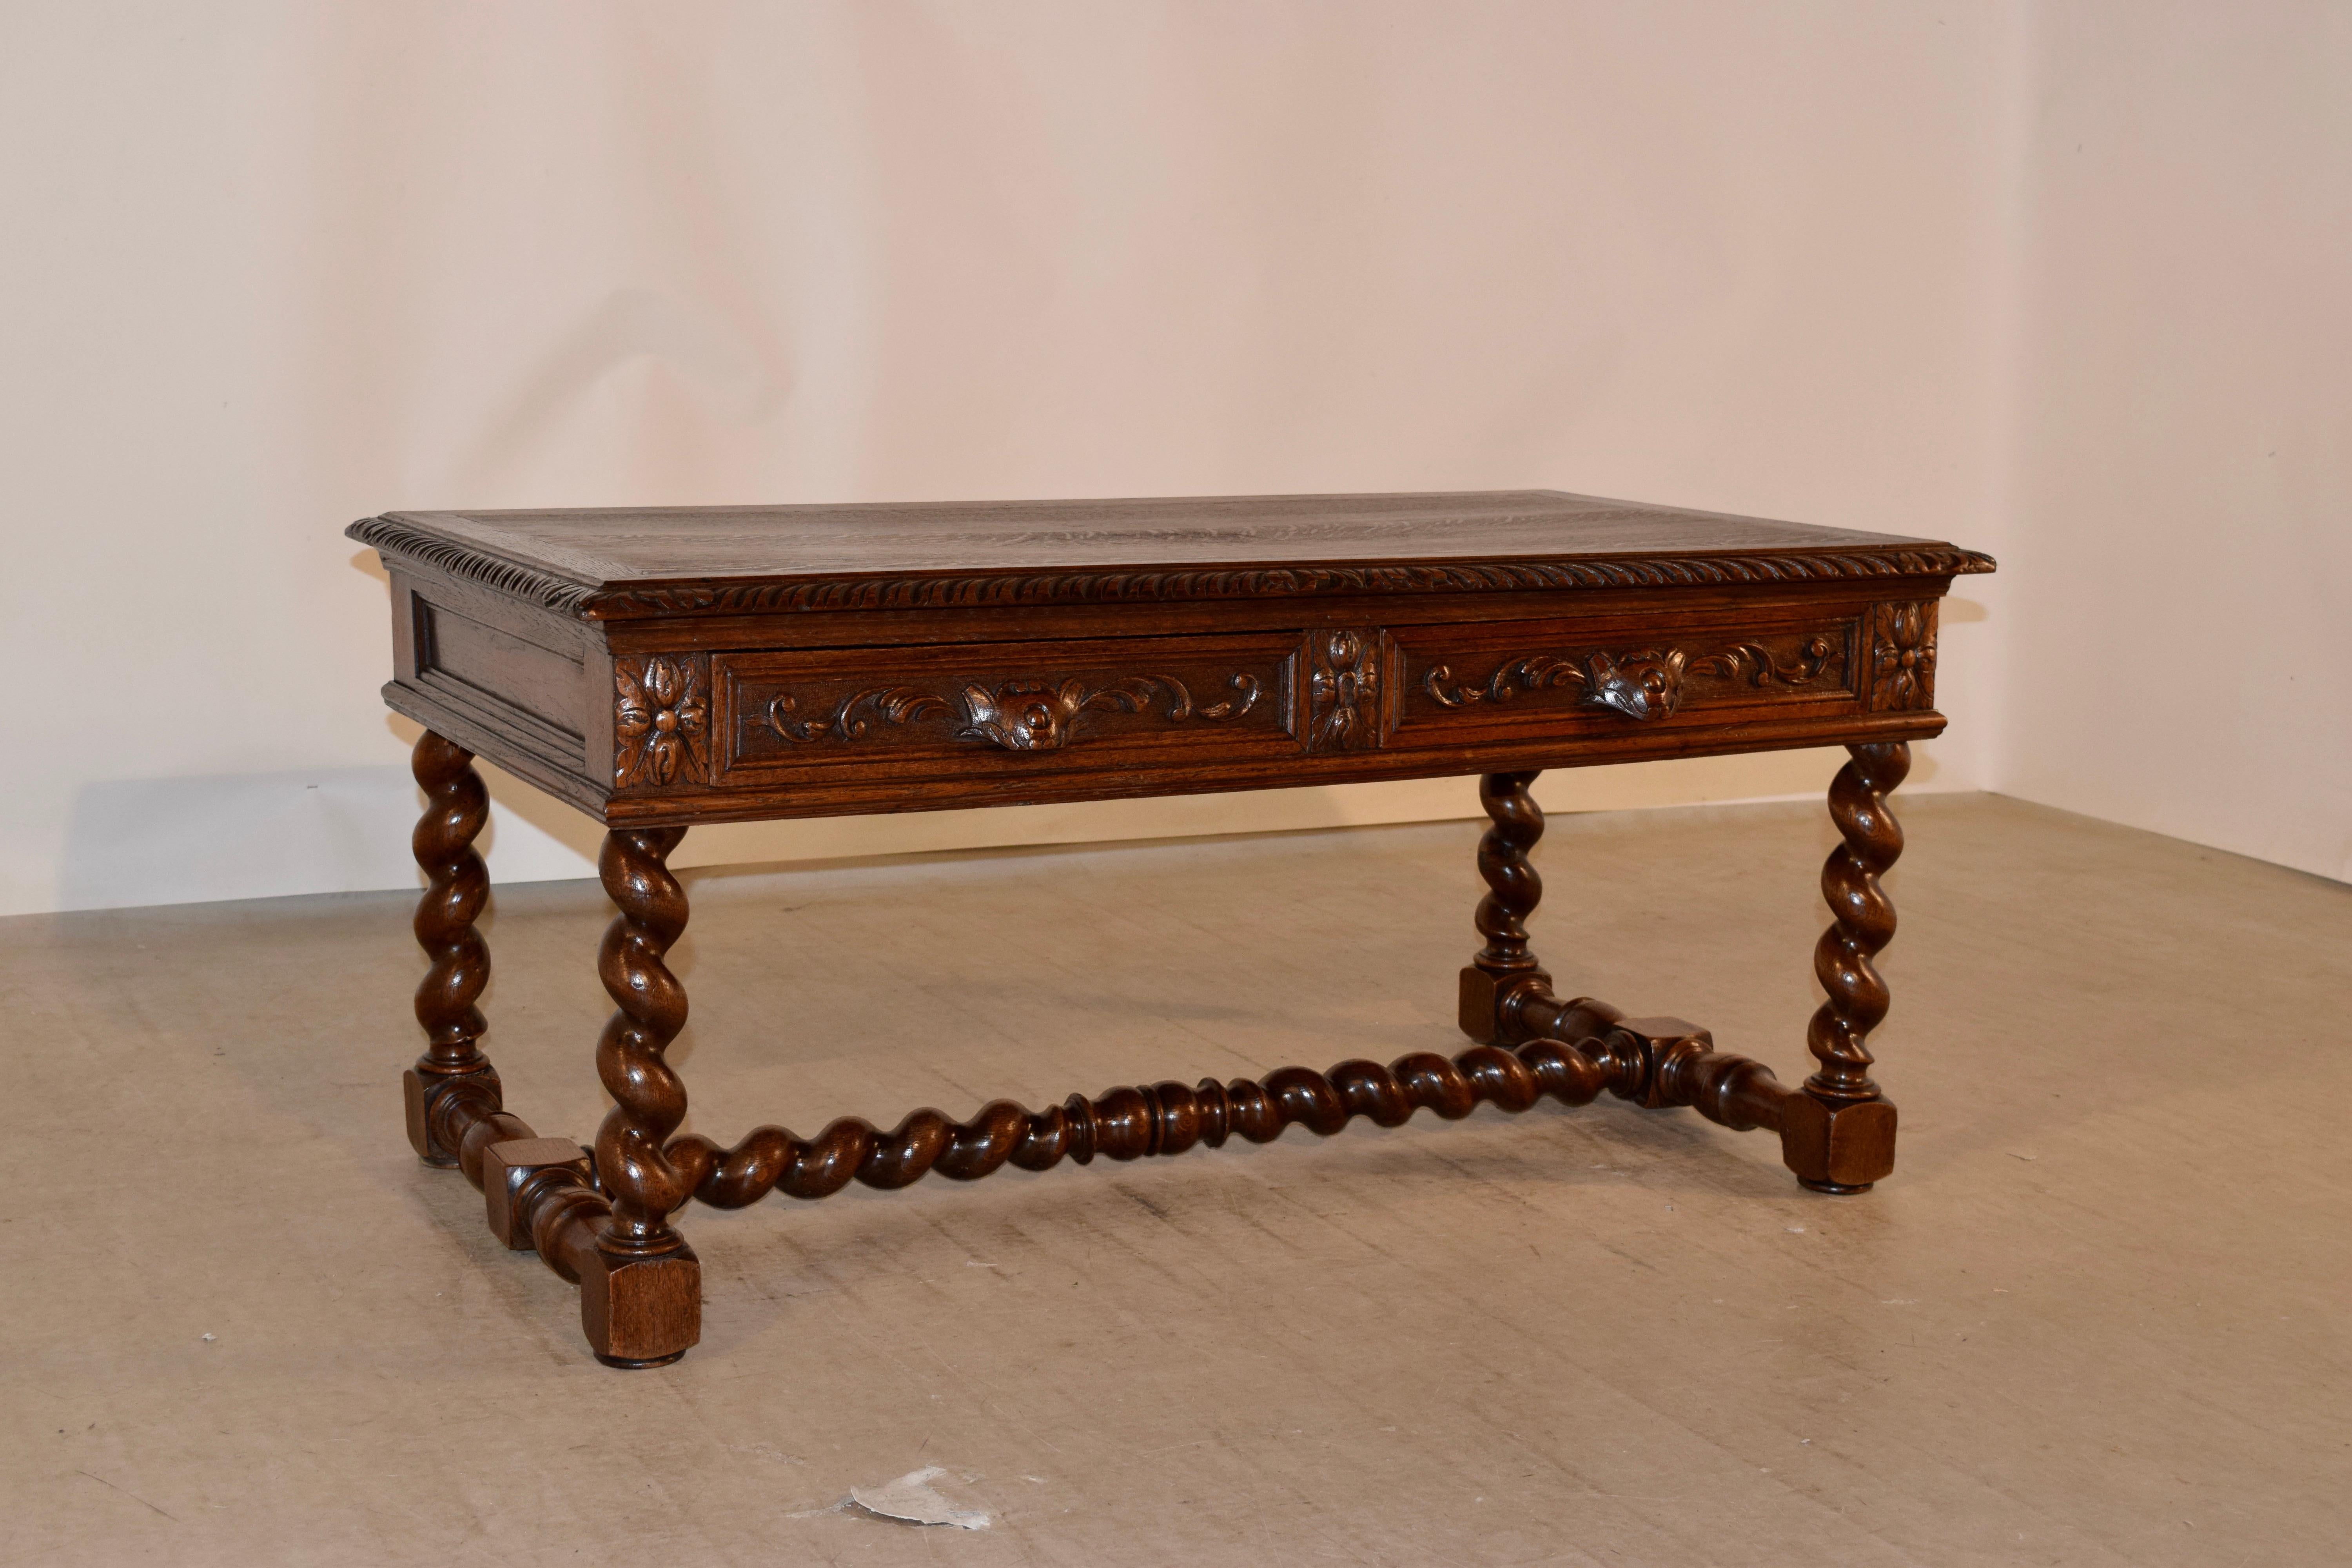 19th century coffee table from France made from oak. The top is banded around the edge and has a beveled and carved decorated edge as well. The apron is paneled and has two drawers with carved decoration in the front, over hand turned barley twist